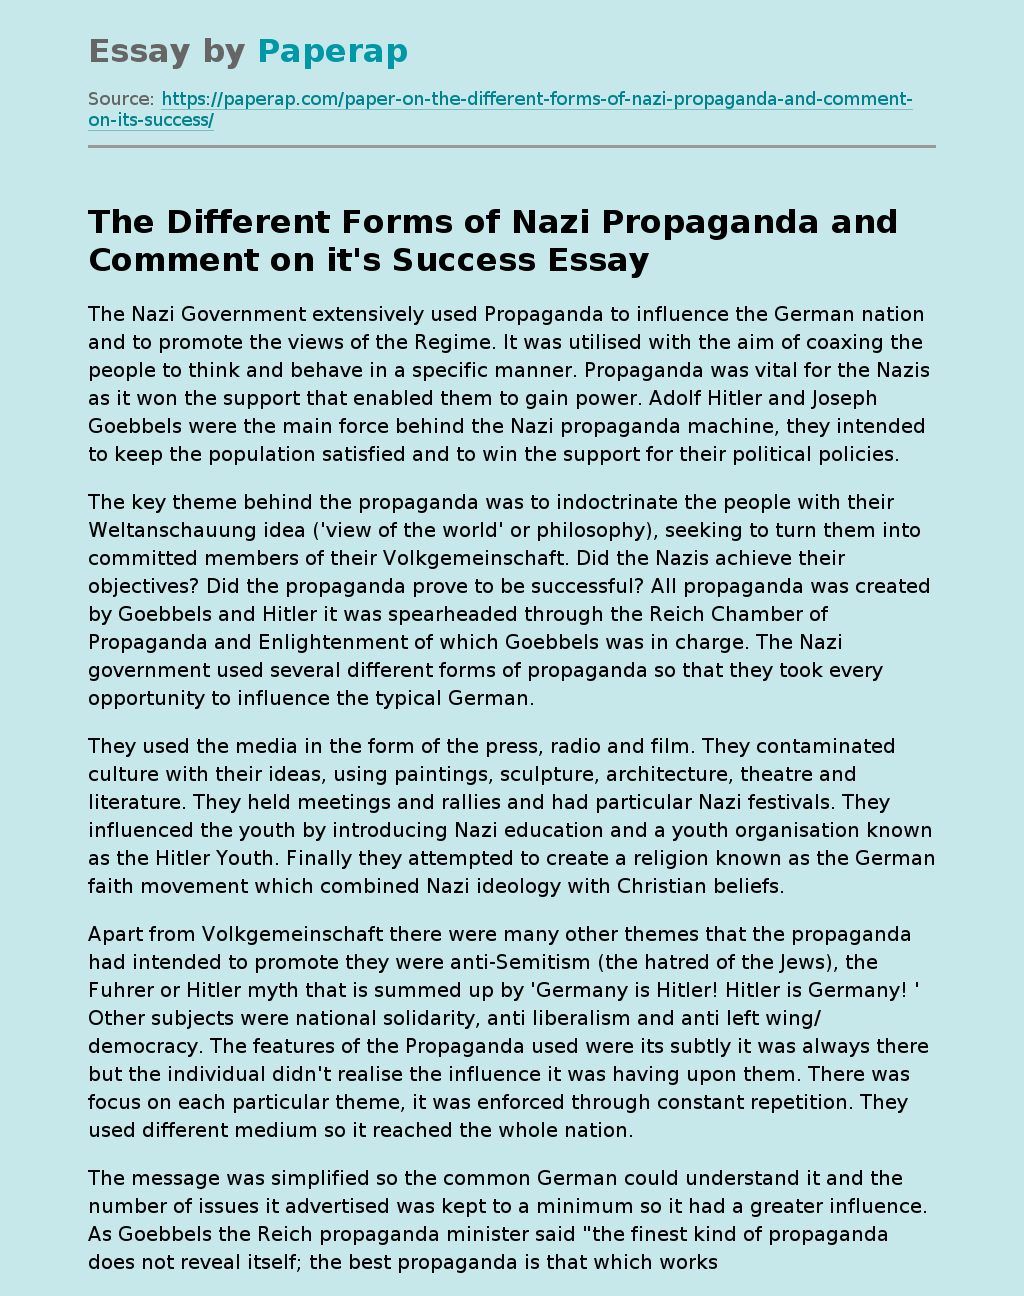 The Different Forms of Nazi Propaganda and Comment on it's Success